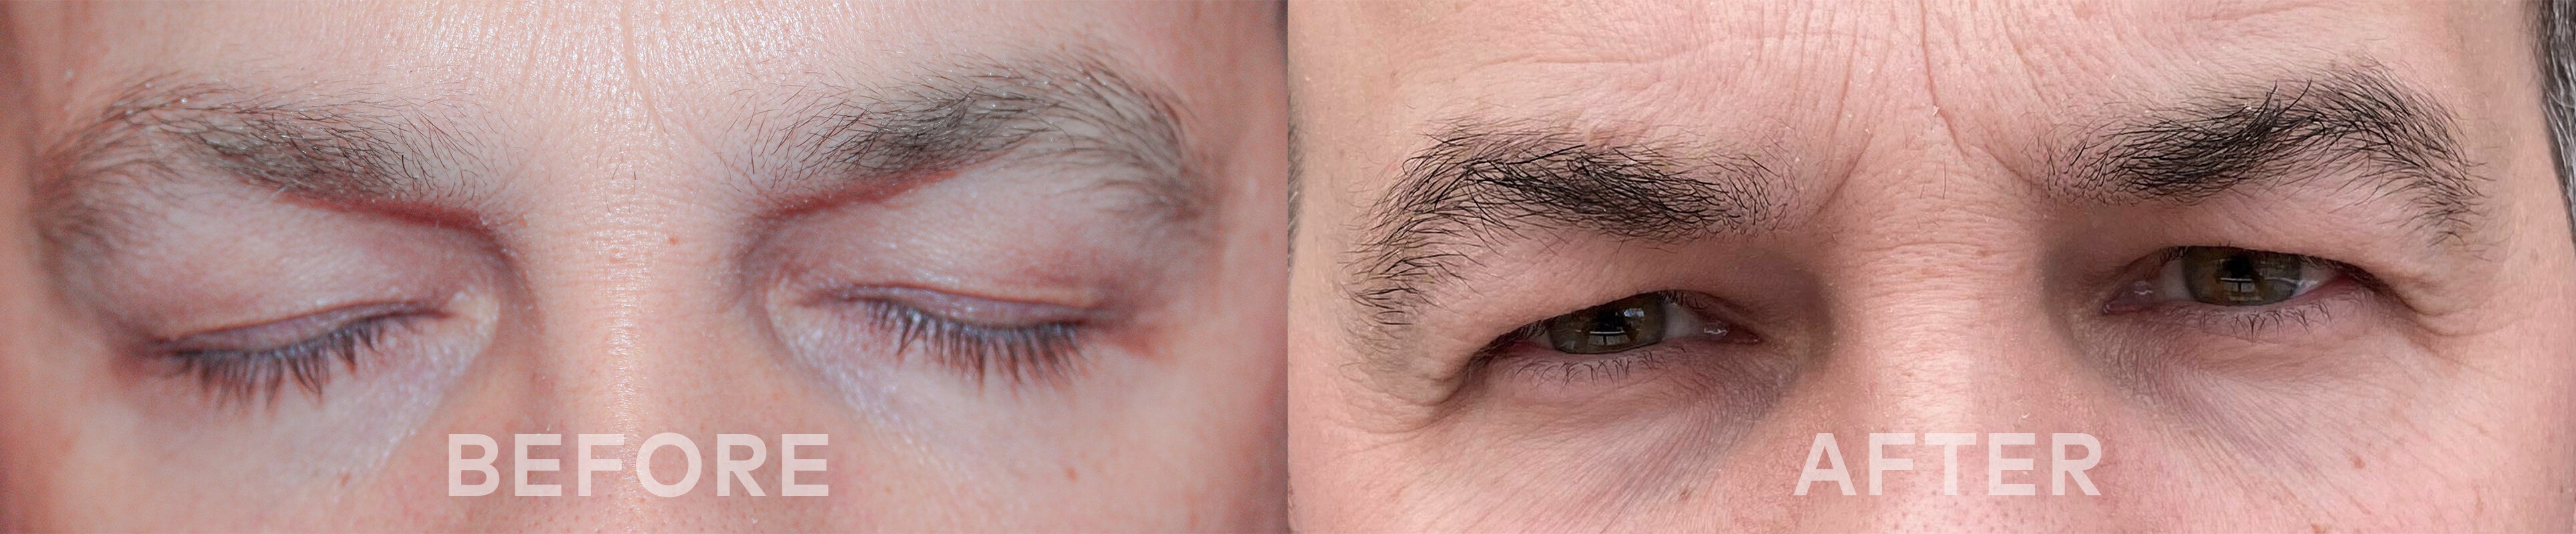 before and after using ADOREYES eyebrows growth serum